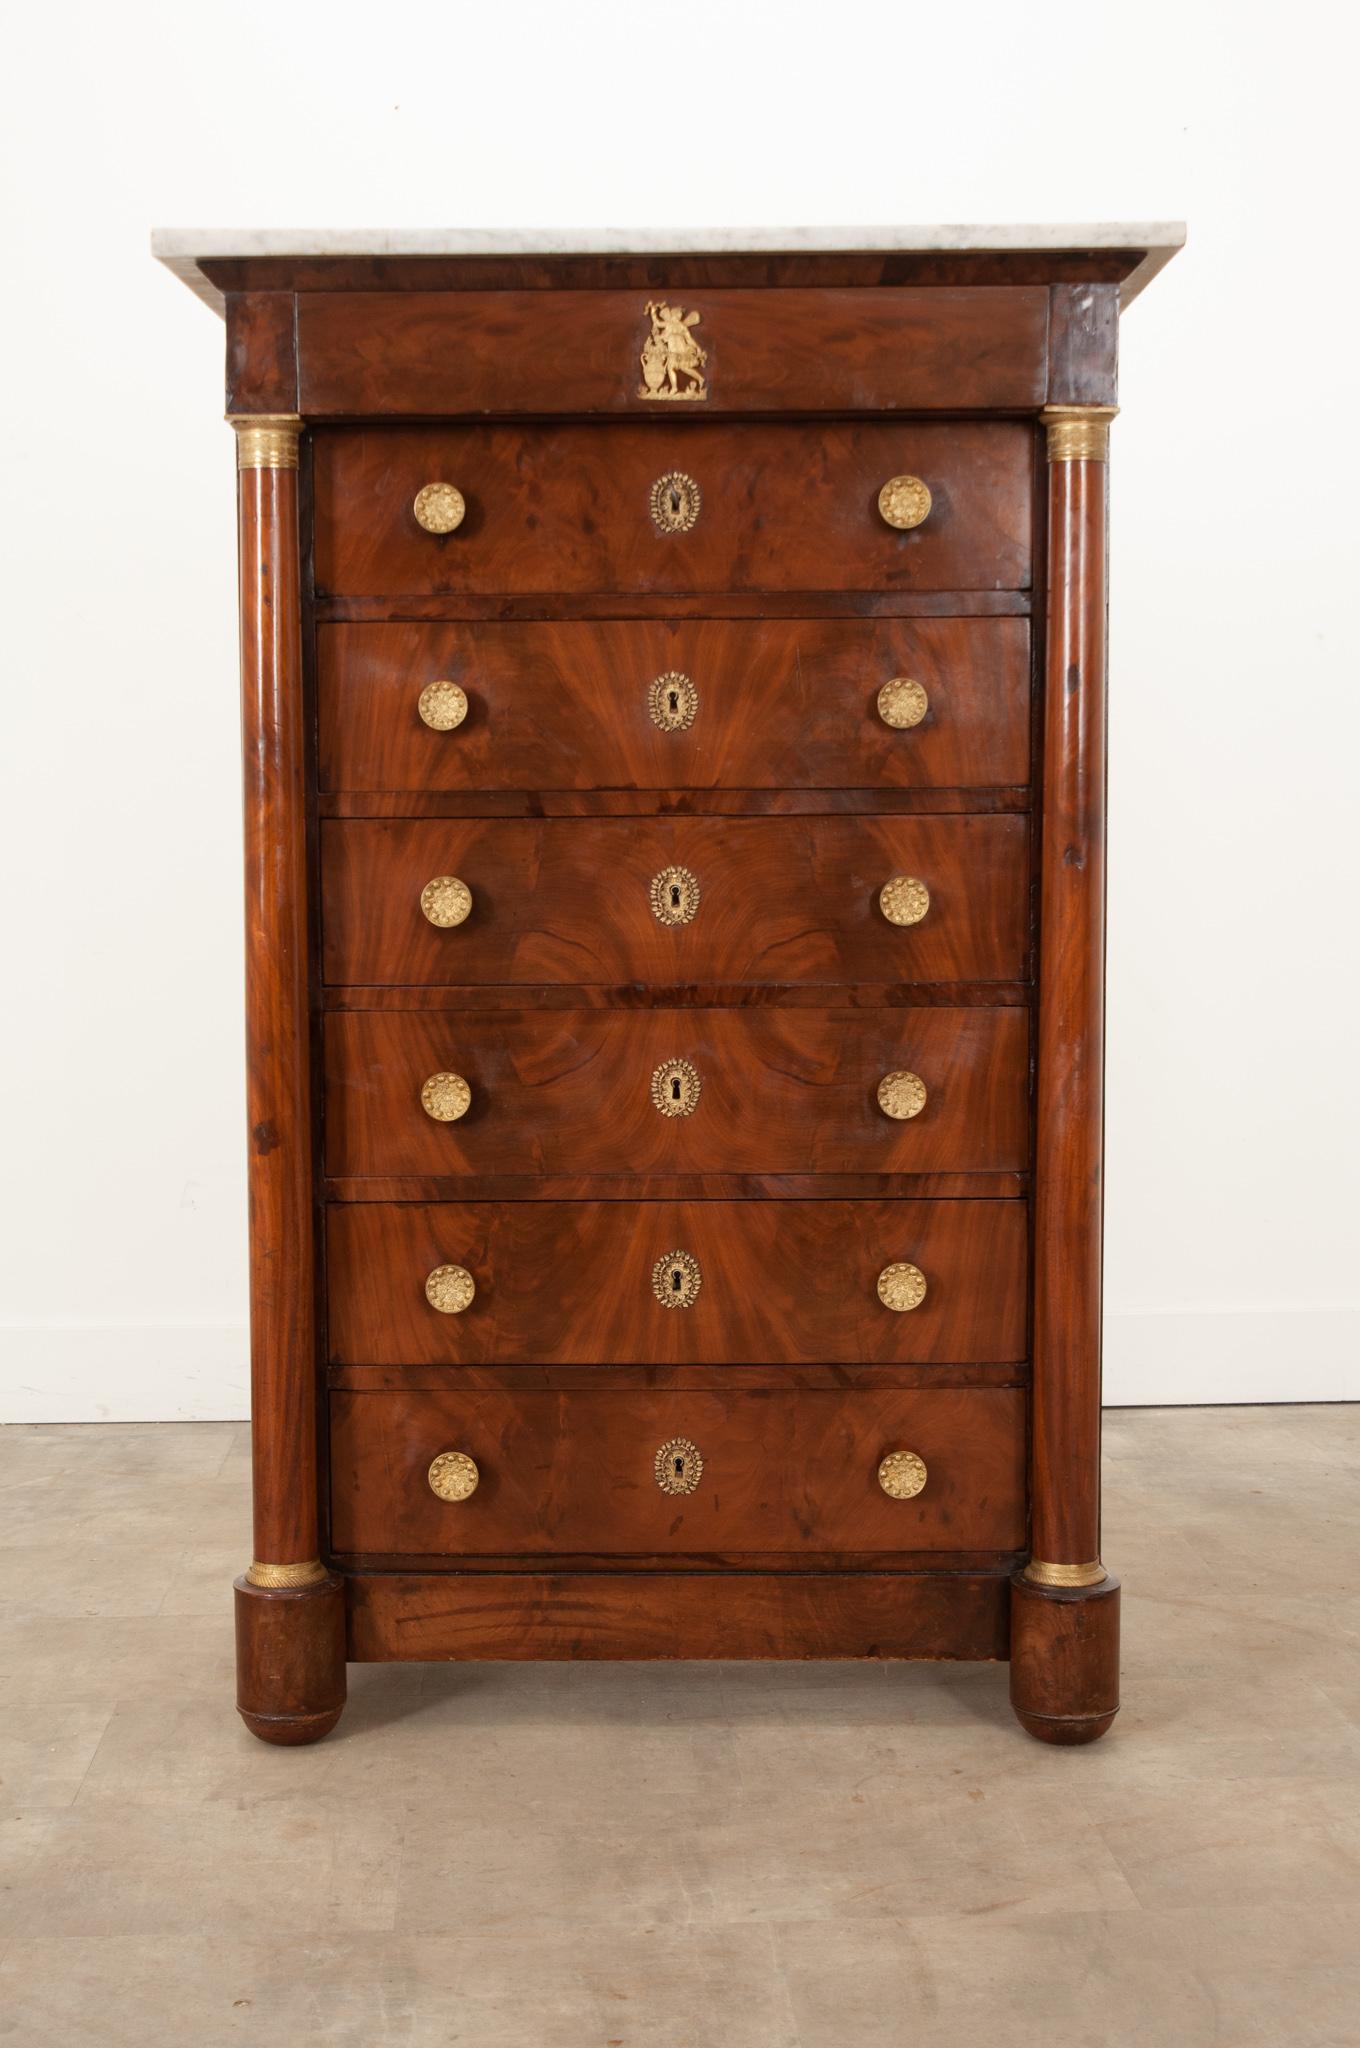 A 19th century French Empire mahogany semainier featuring artful neoclassical hardware. Hand-crafted in France circa 1810, this semainier is fitted with seven drawers to provide a drawer of clothing or lingerie for every day of the week. A beautiful